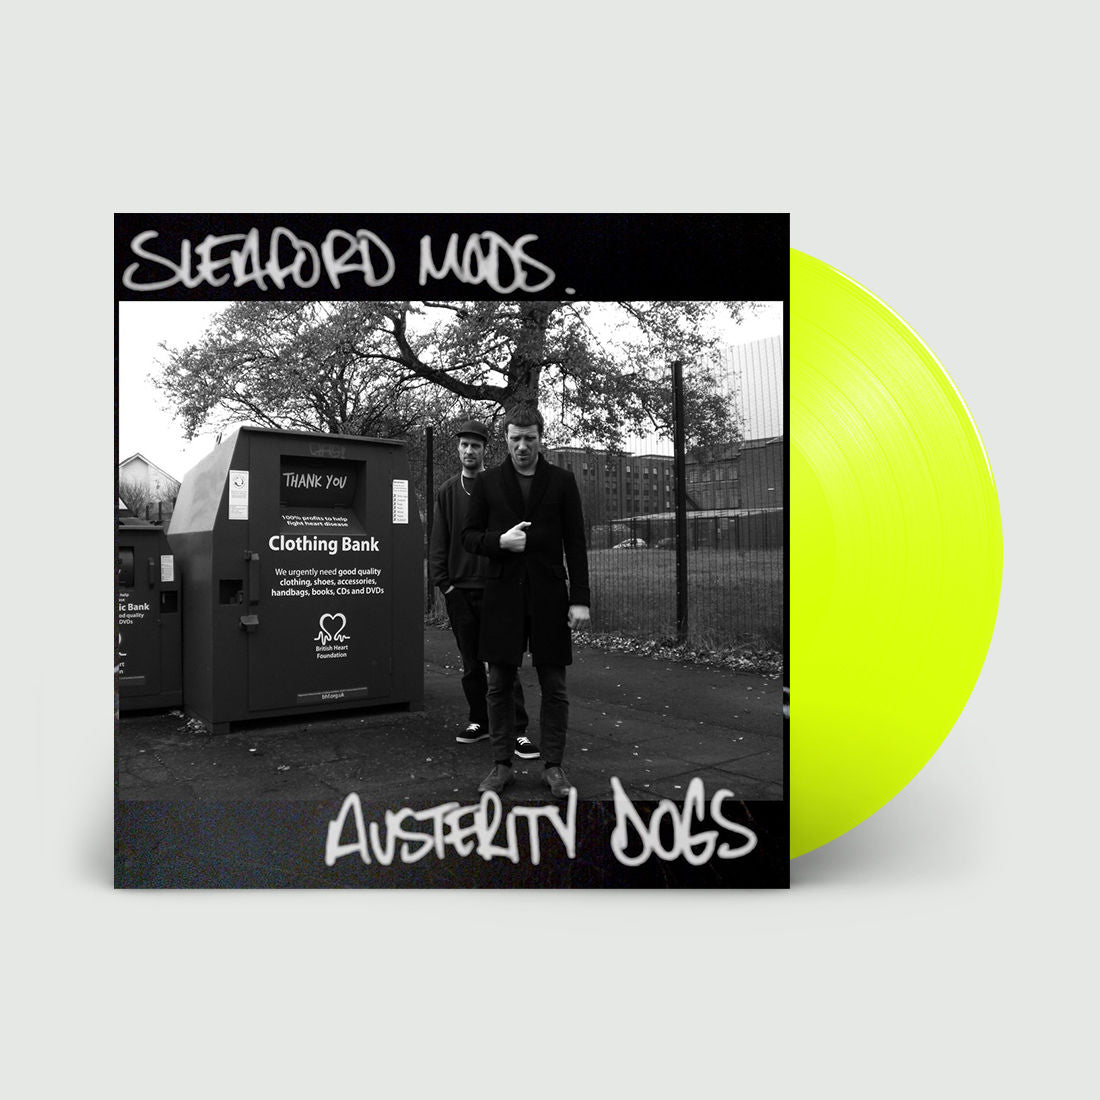 Sleaford Mods - Austerity Dogs: Limited Edition Neon Yellow Vinyl LP